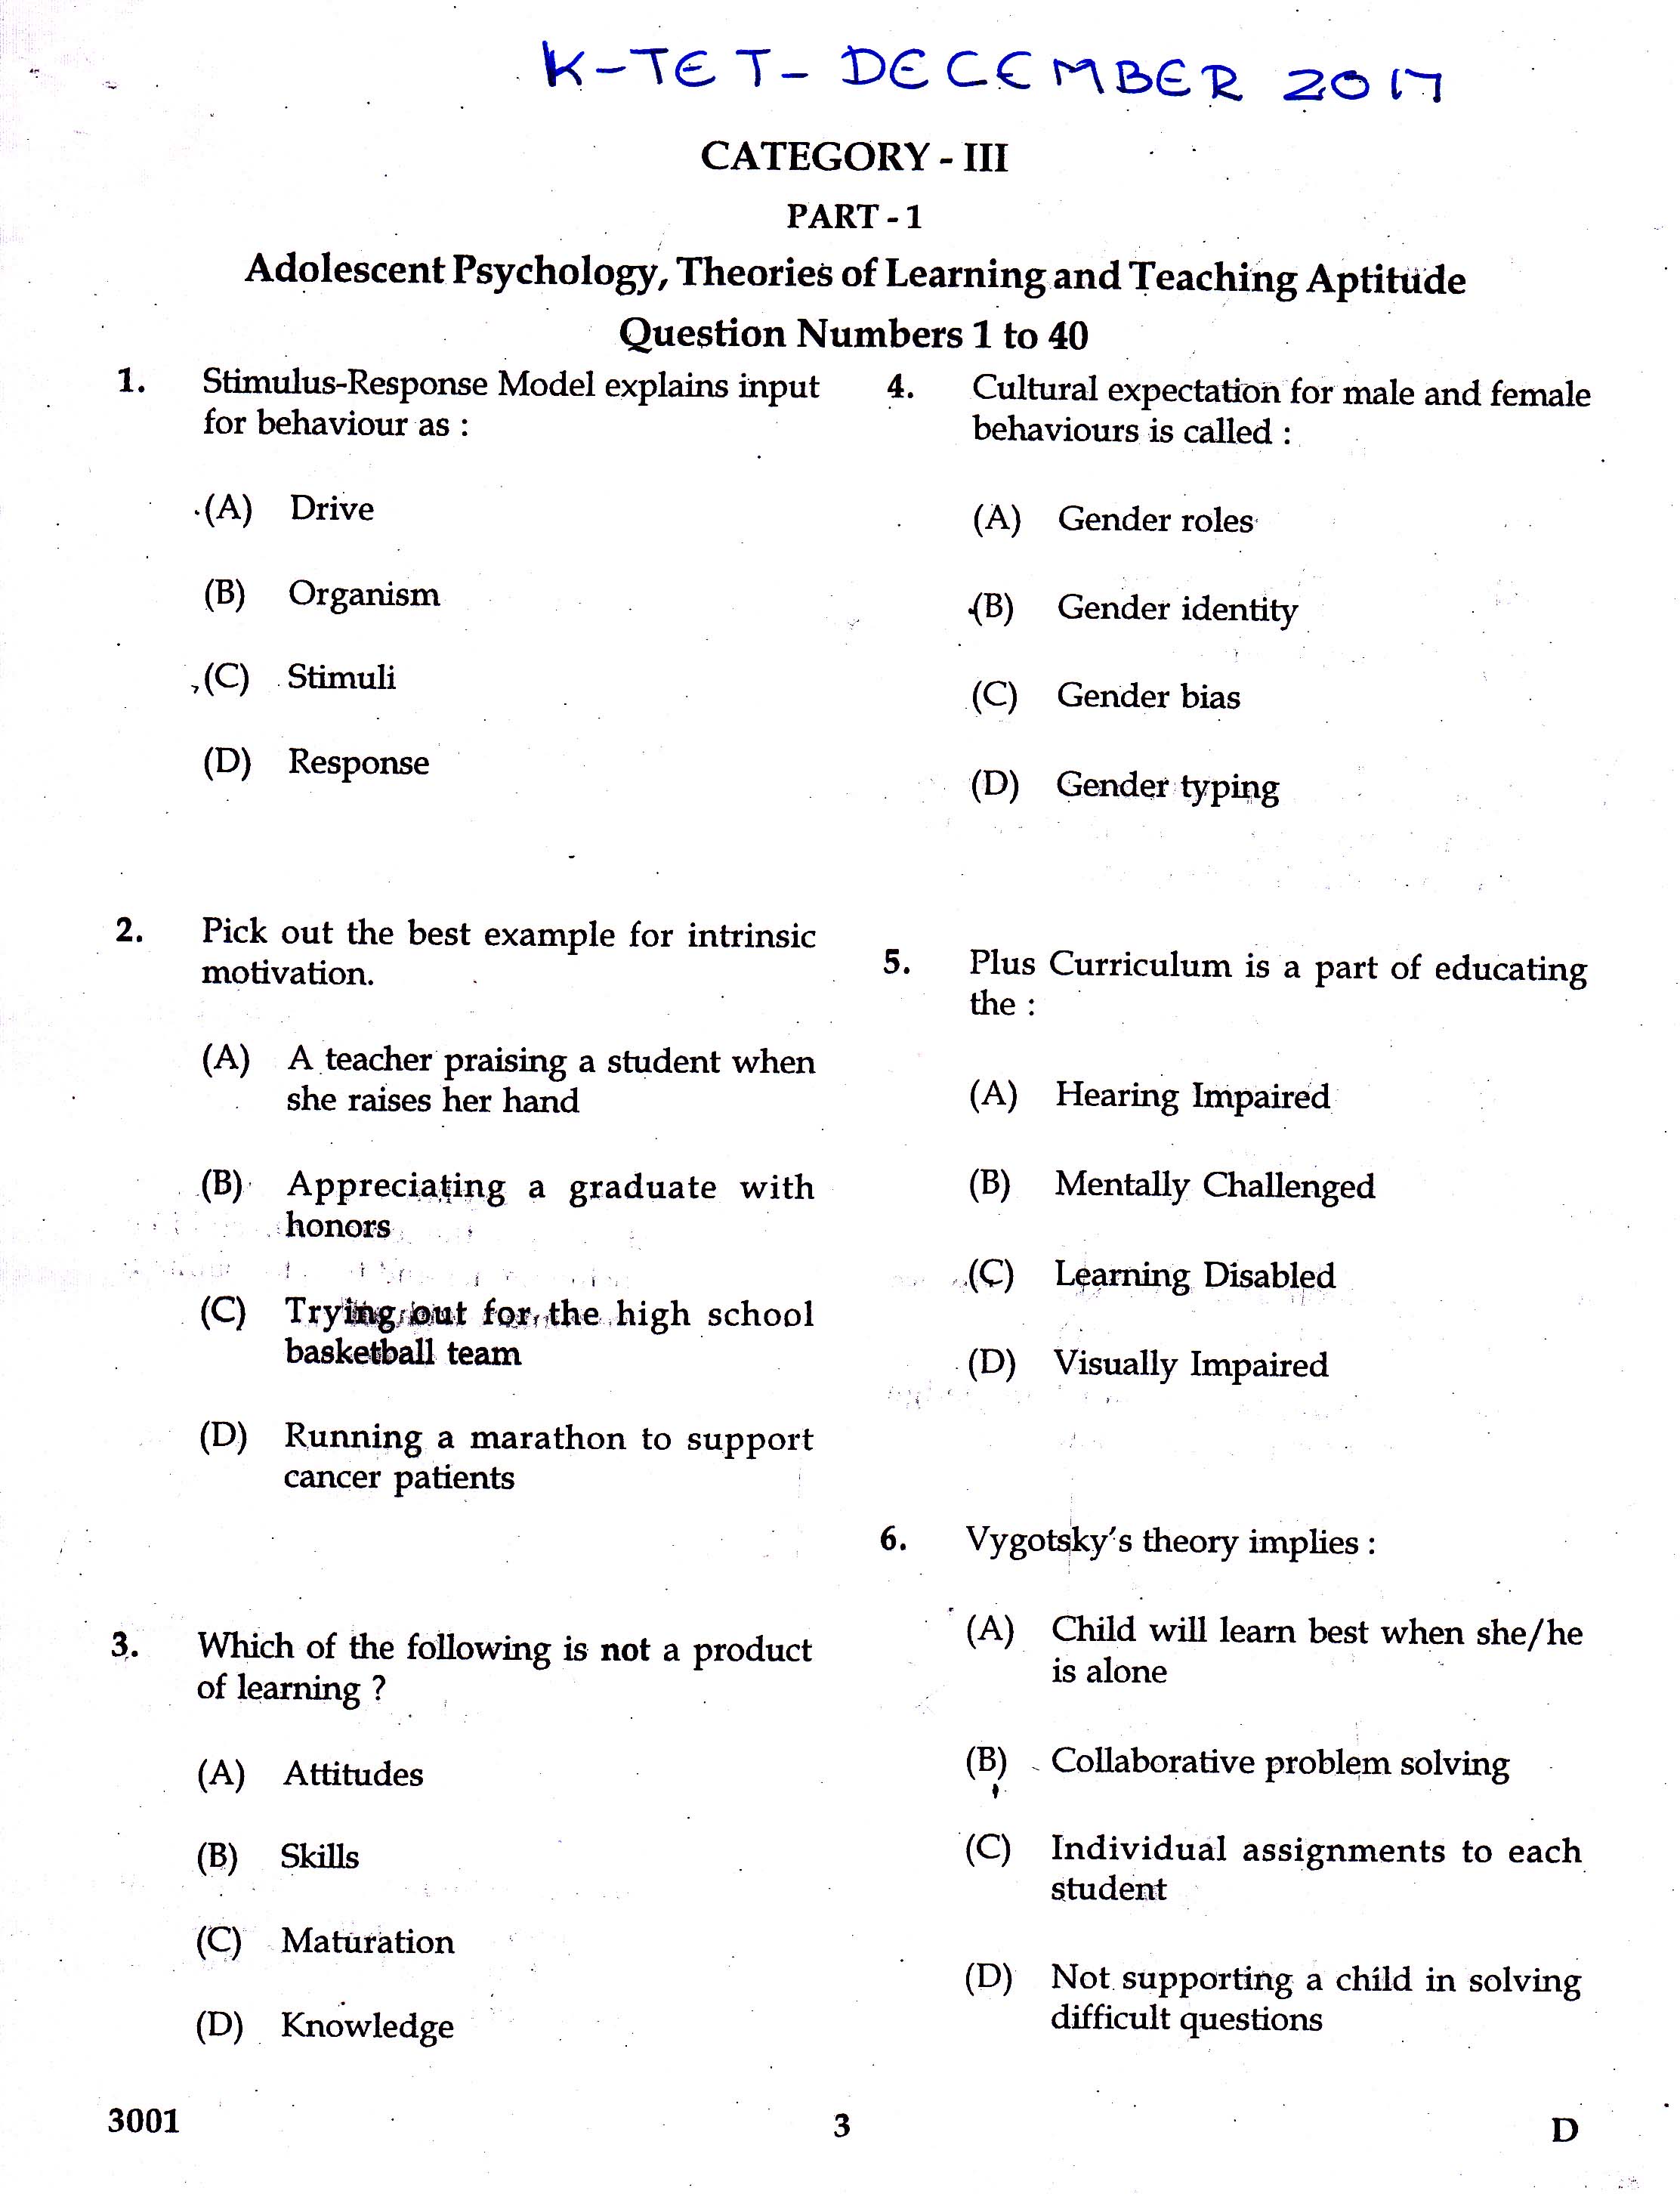 KTET Category III Part 1 Adolescent Psychology Question Paper with Answers 2017 1